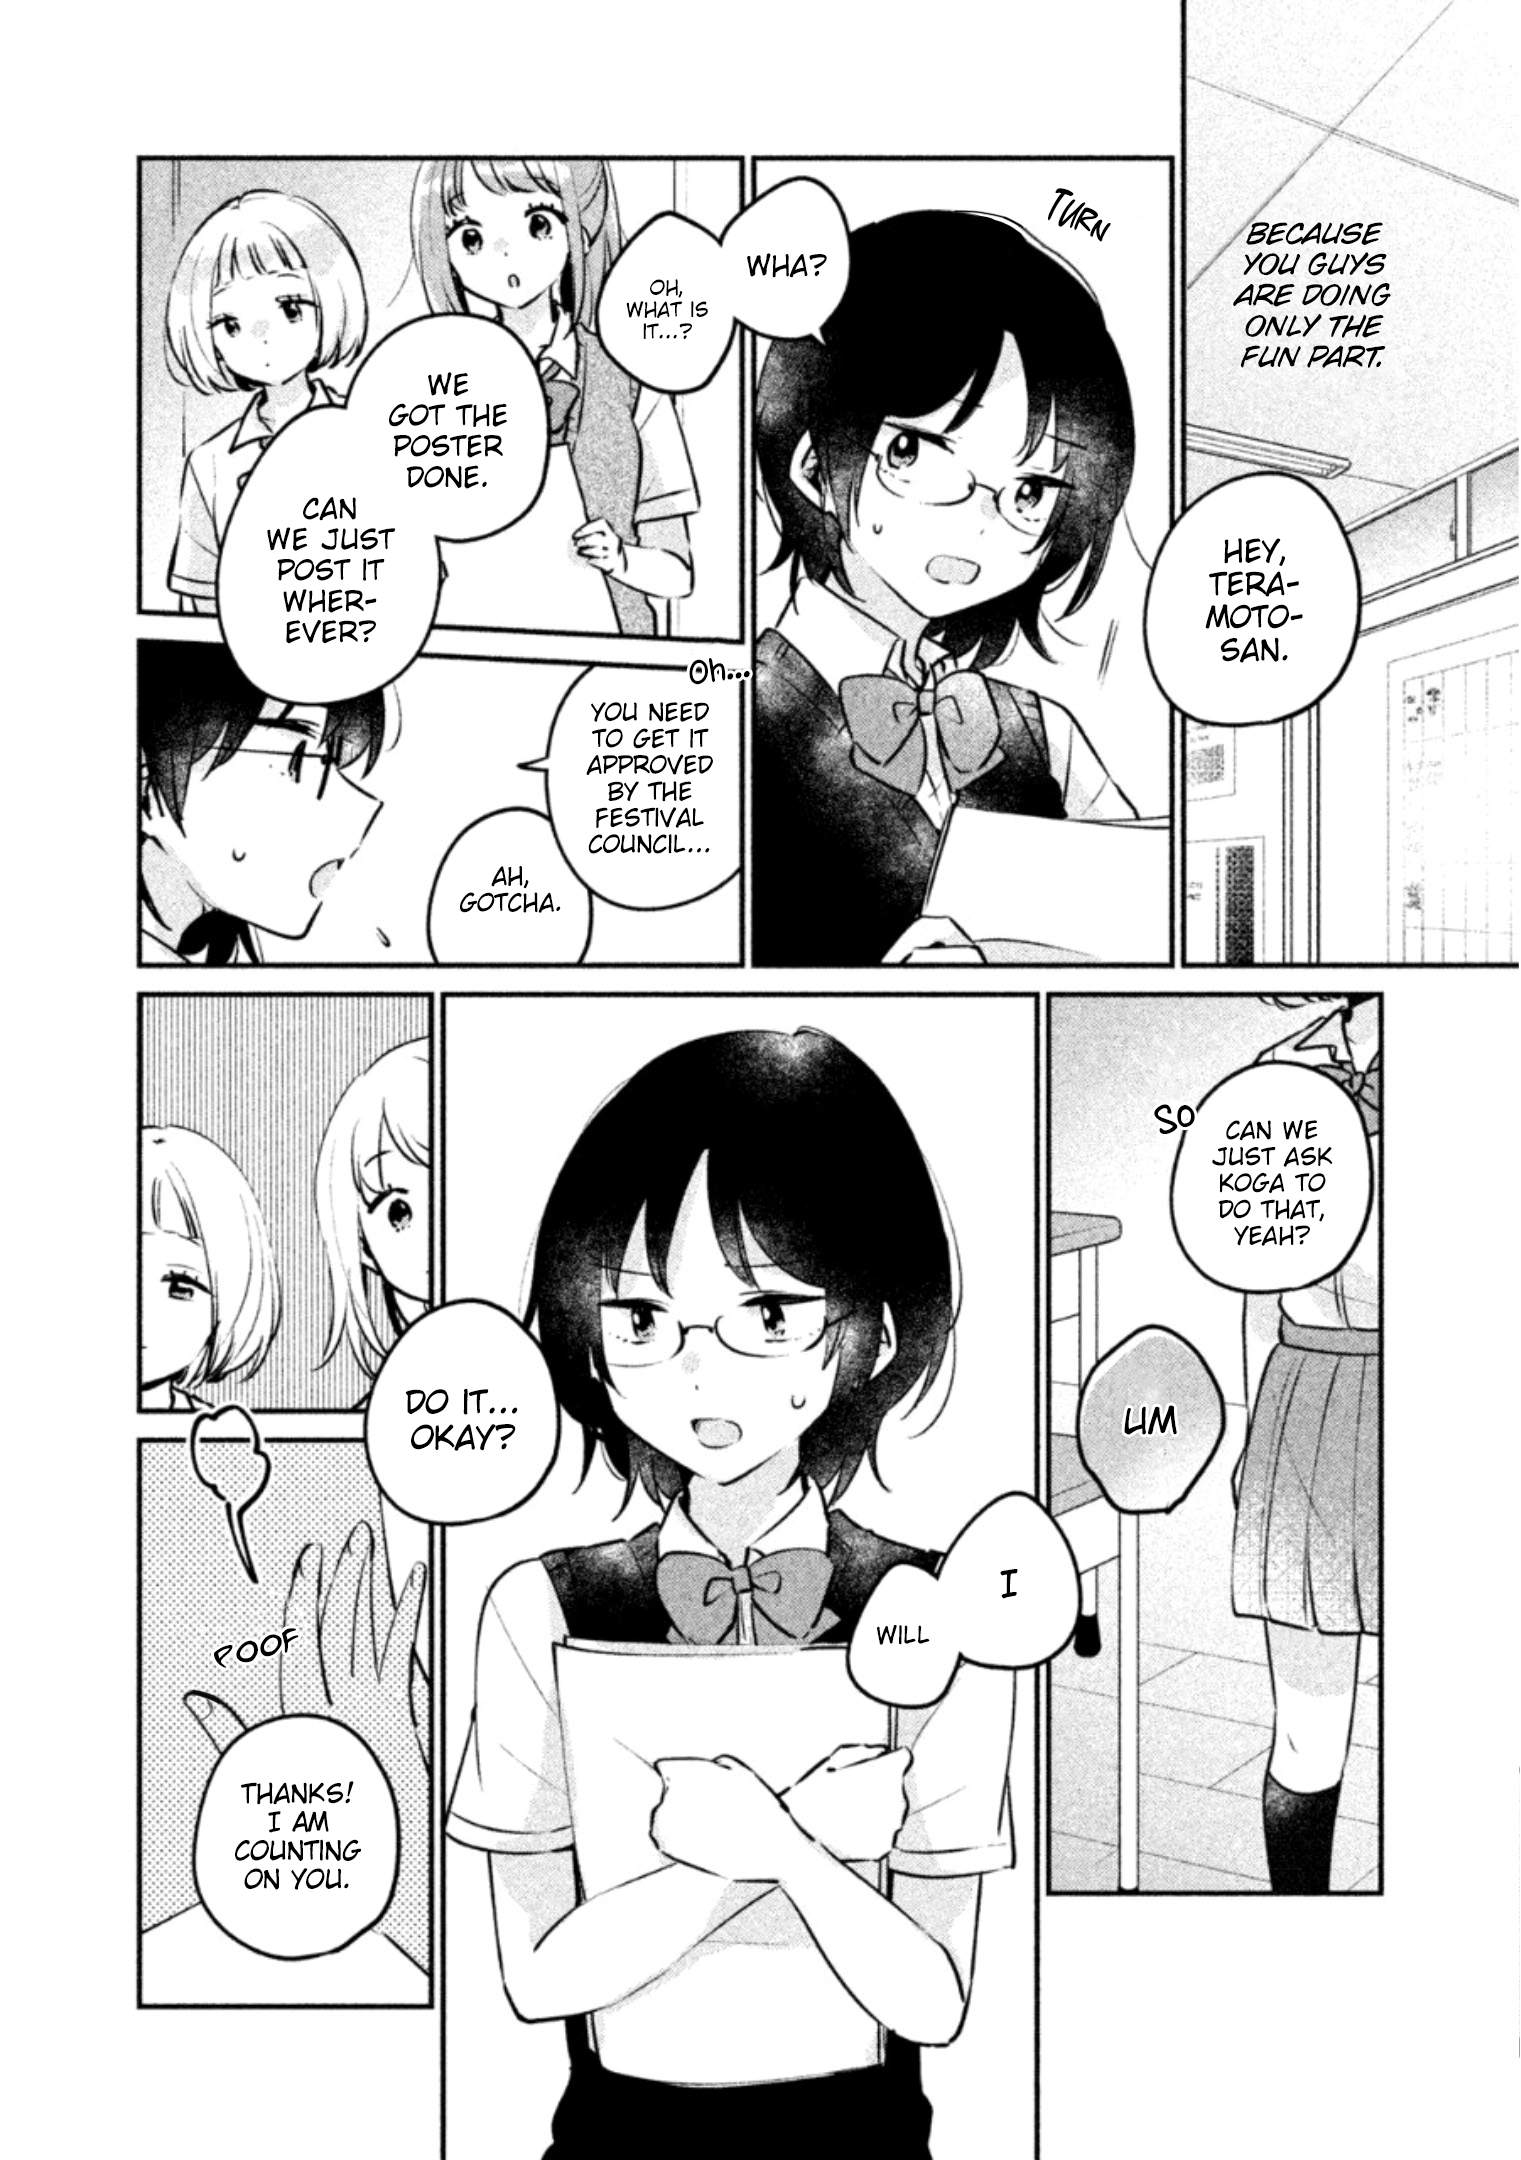 It's Not Meguro-san's First Time chapter 21 page 3